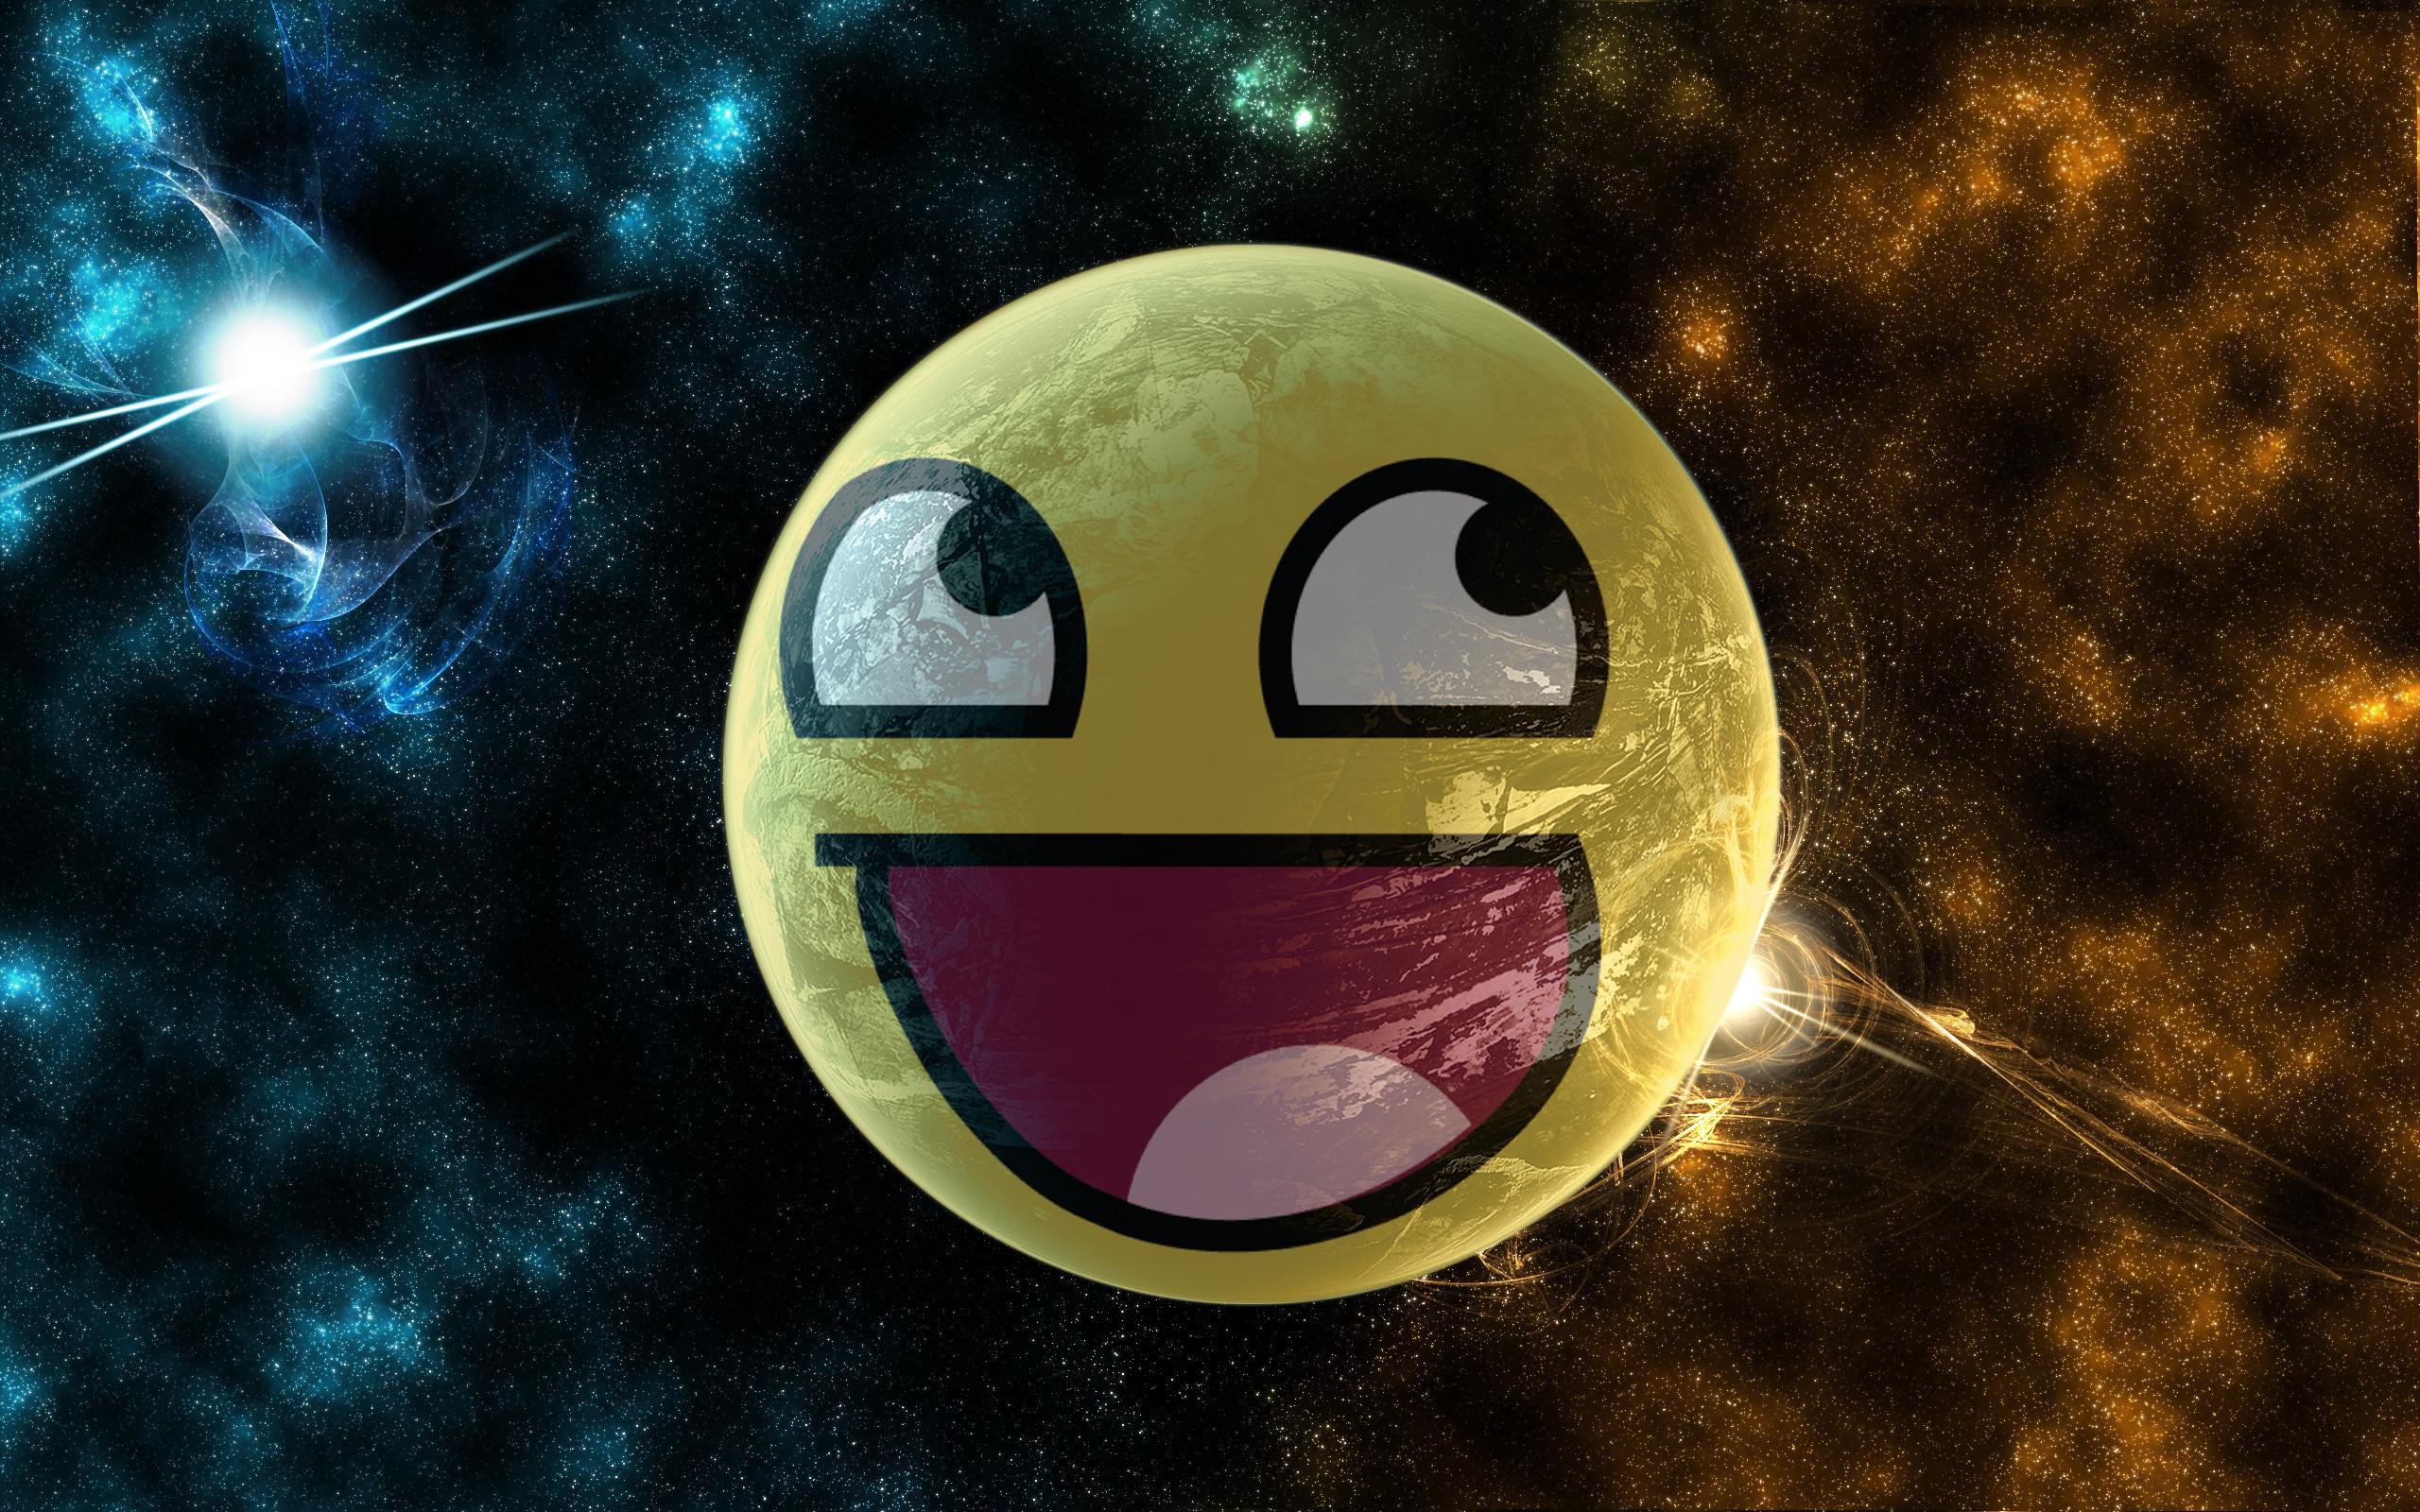 awesome smiley face explosion